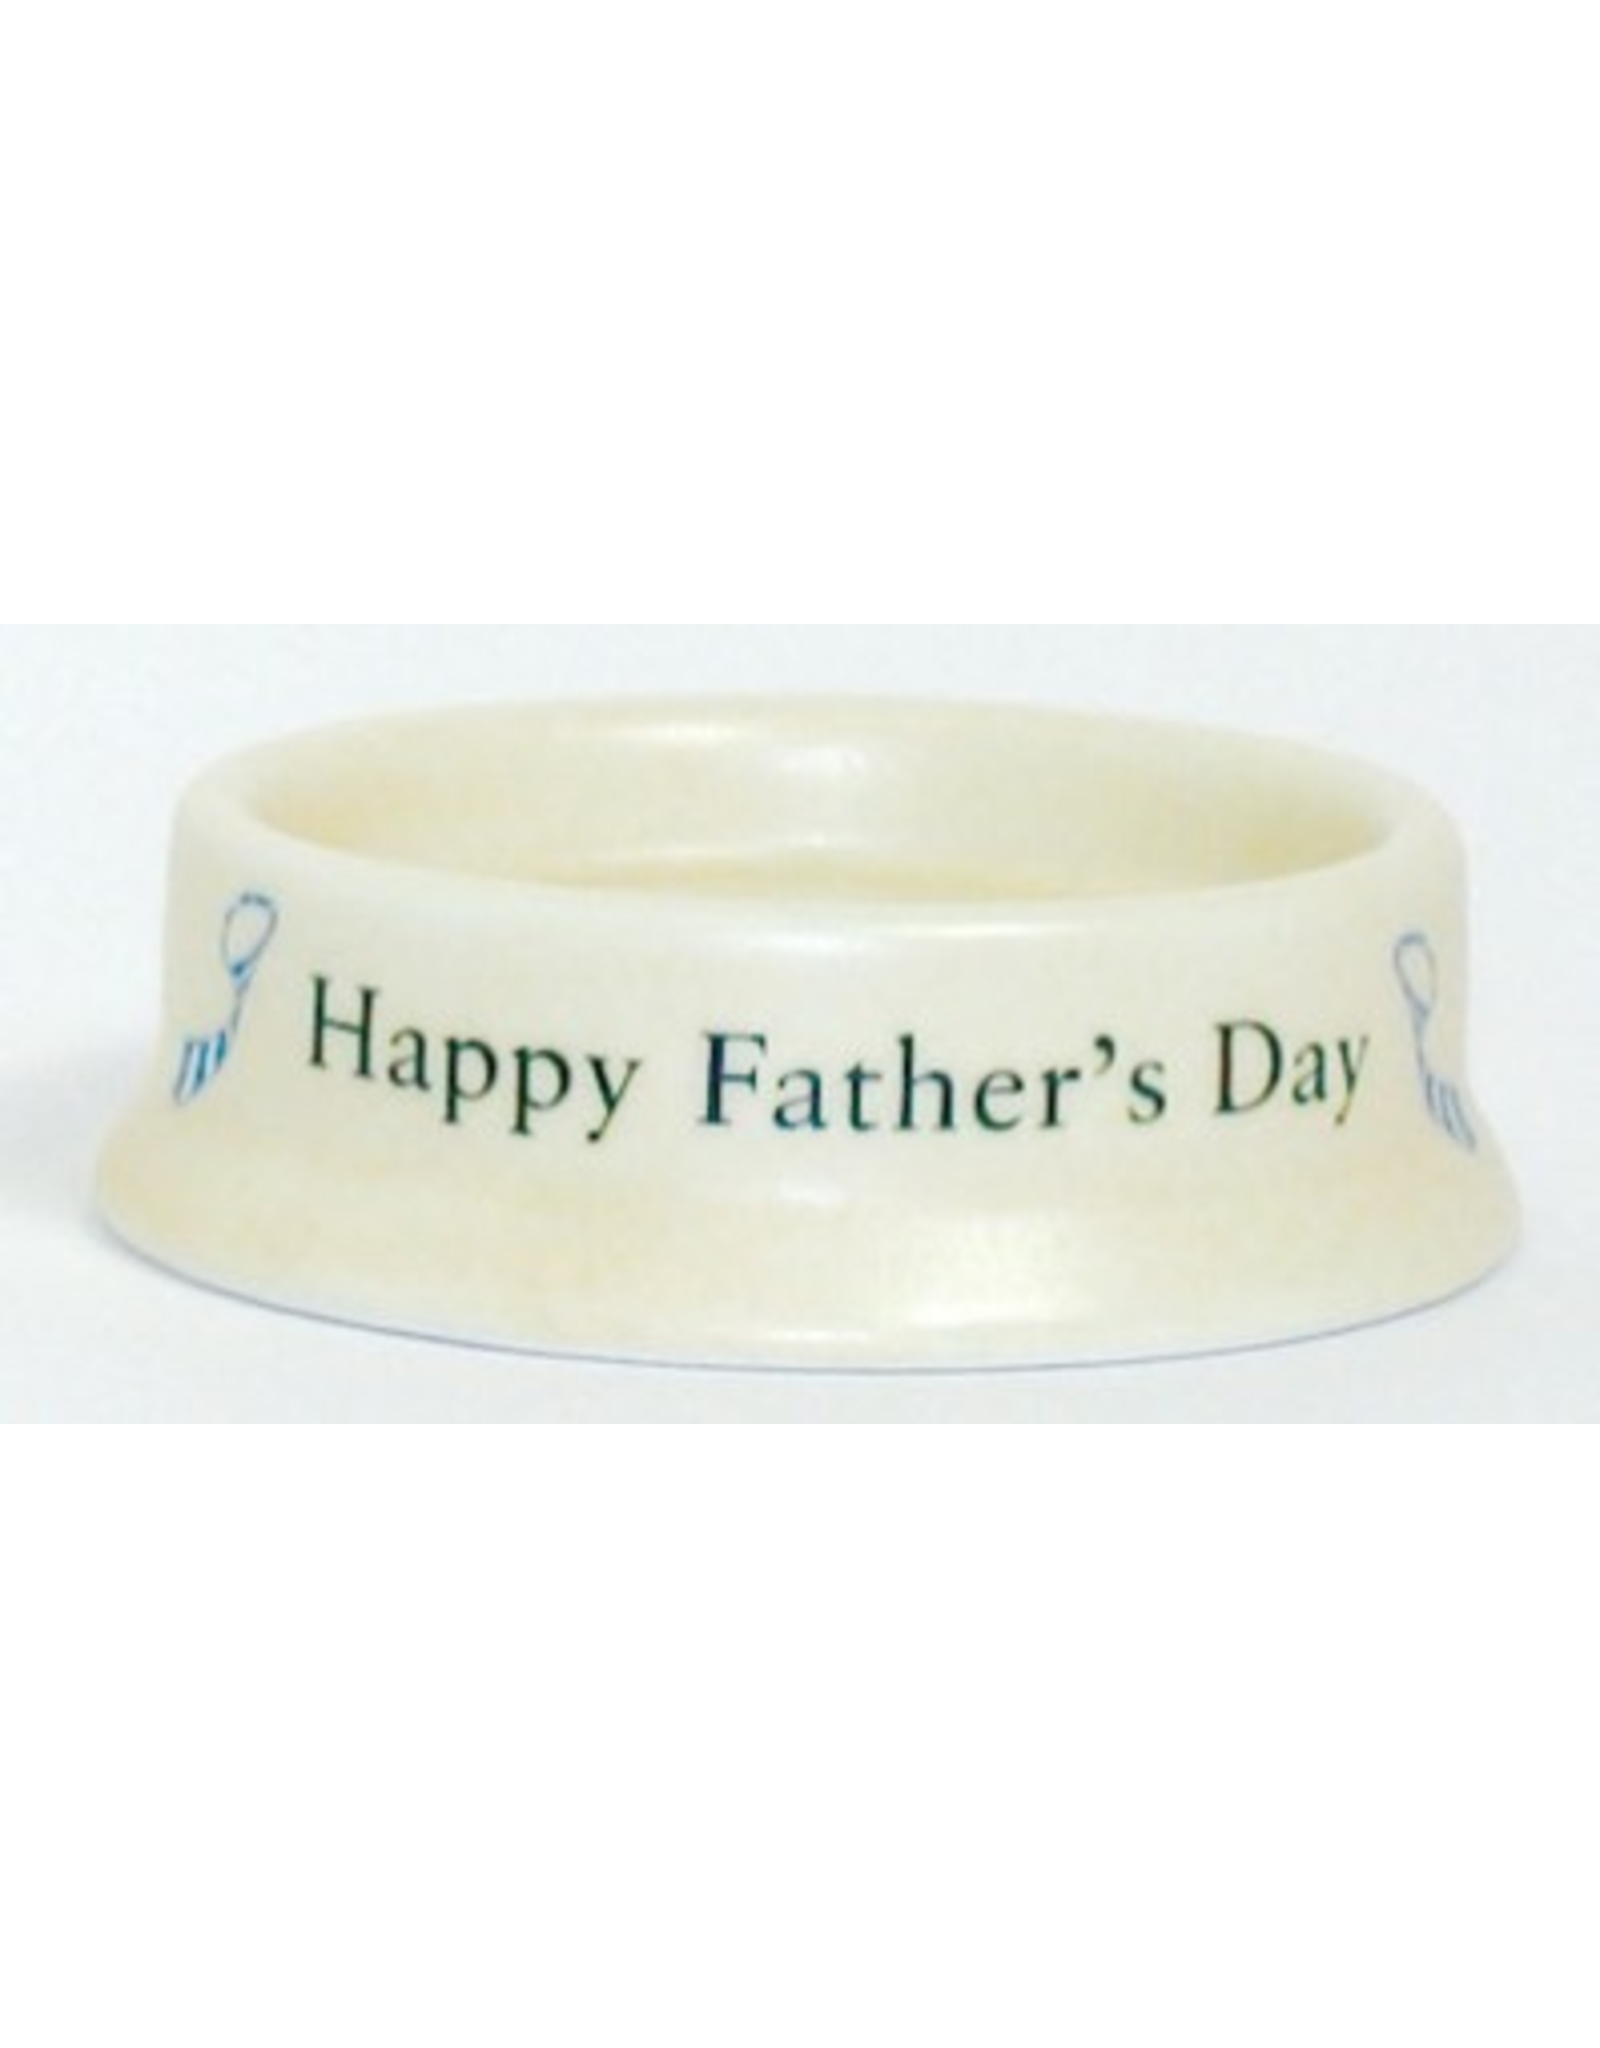 Daggry Lav vej Katastrofe Happy Fathers Day Occassion Base 827130 Hummel - Digs N Gifts